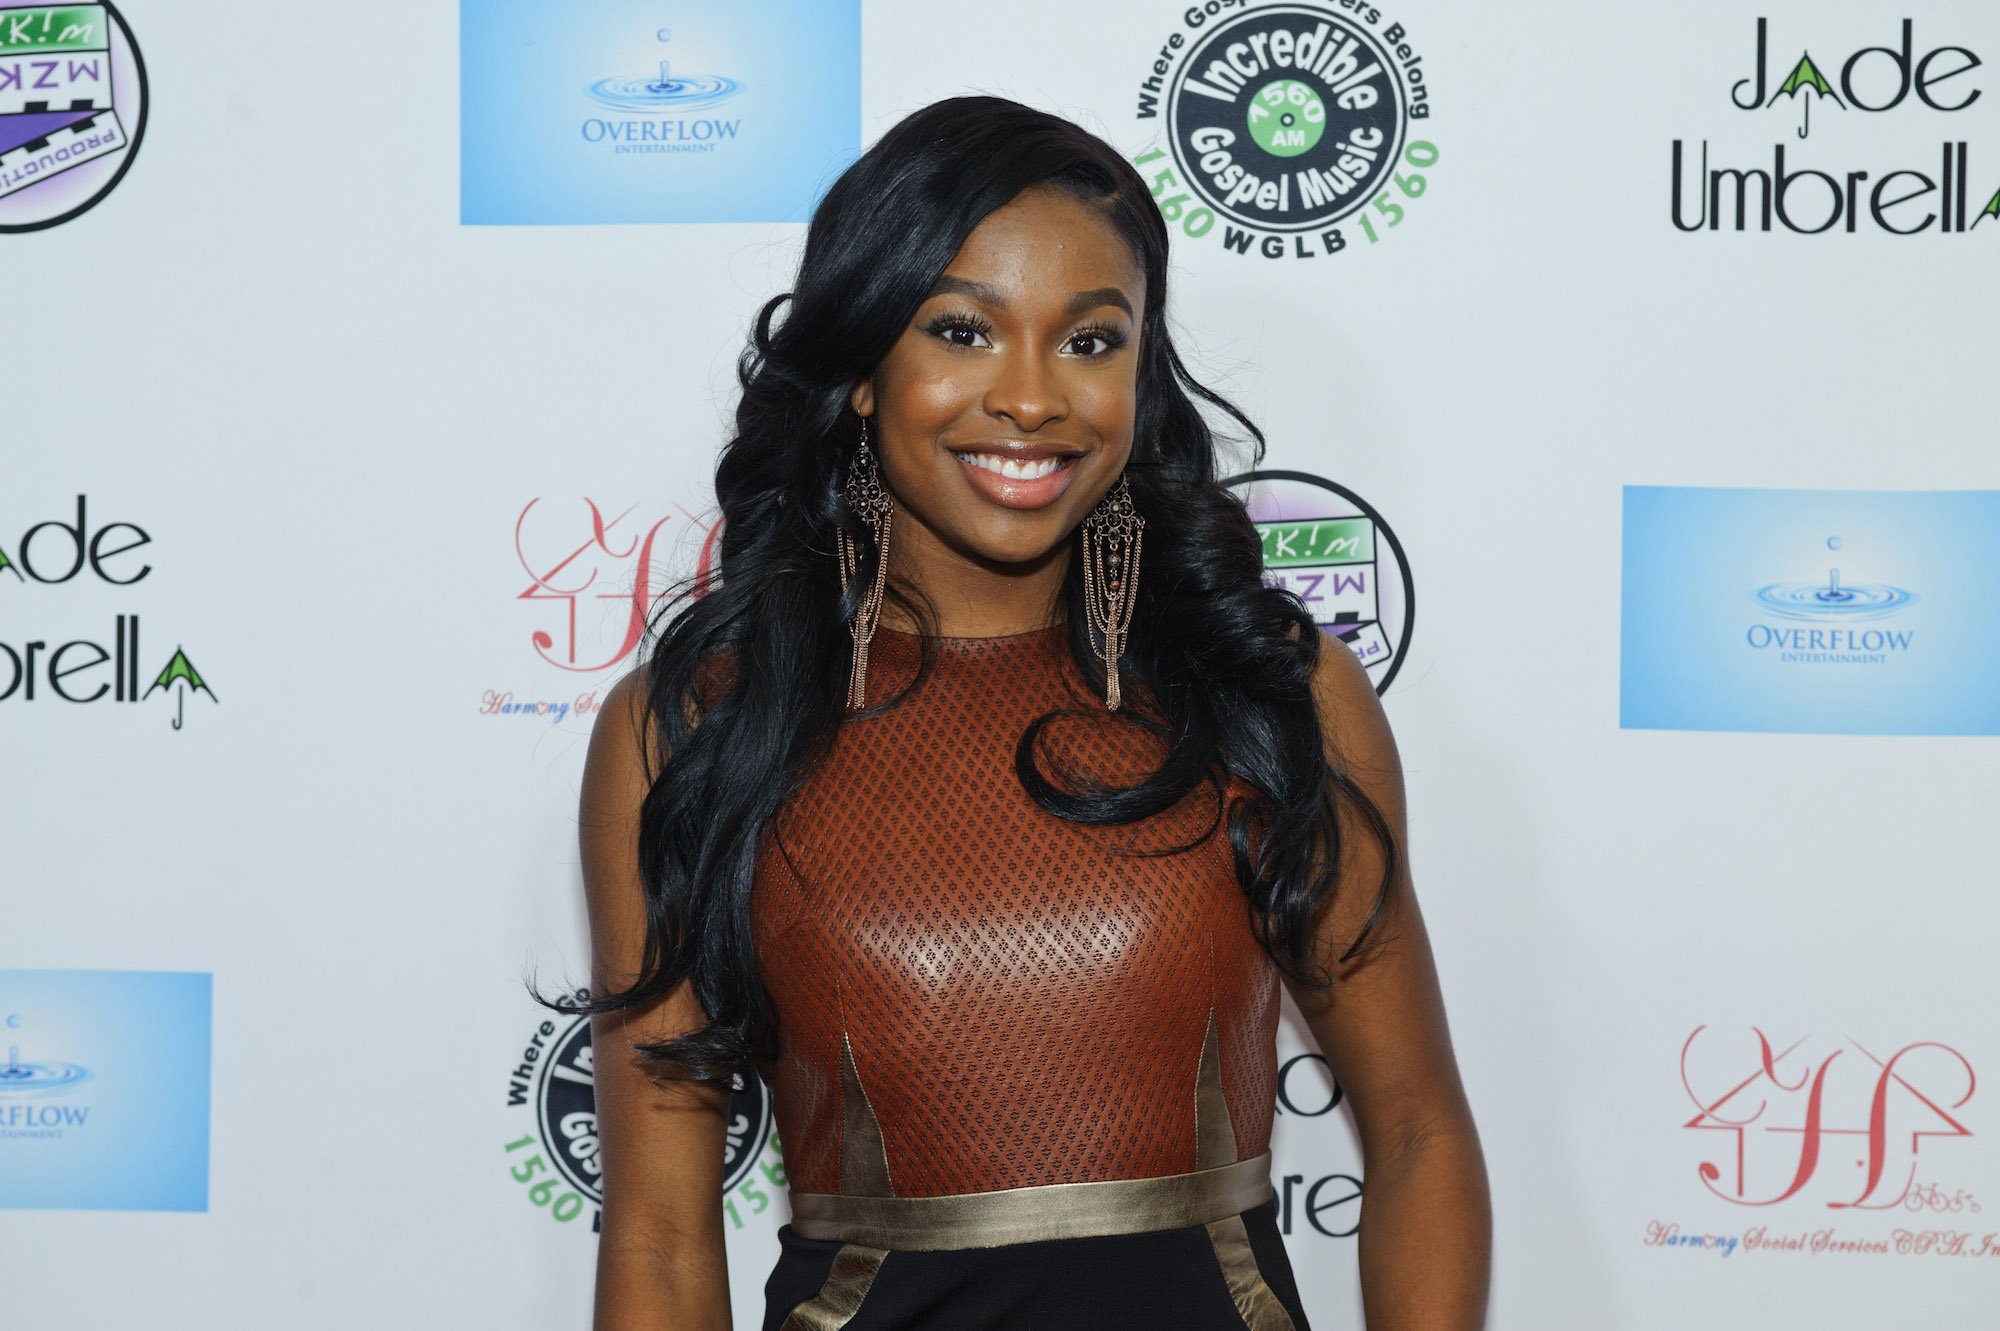 Coco Jones wearing a brown topped dress with gold earrings.